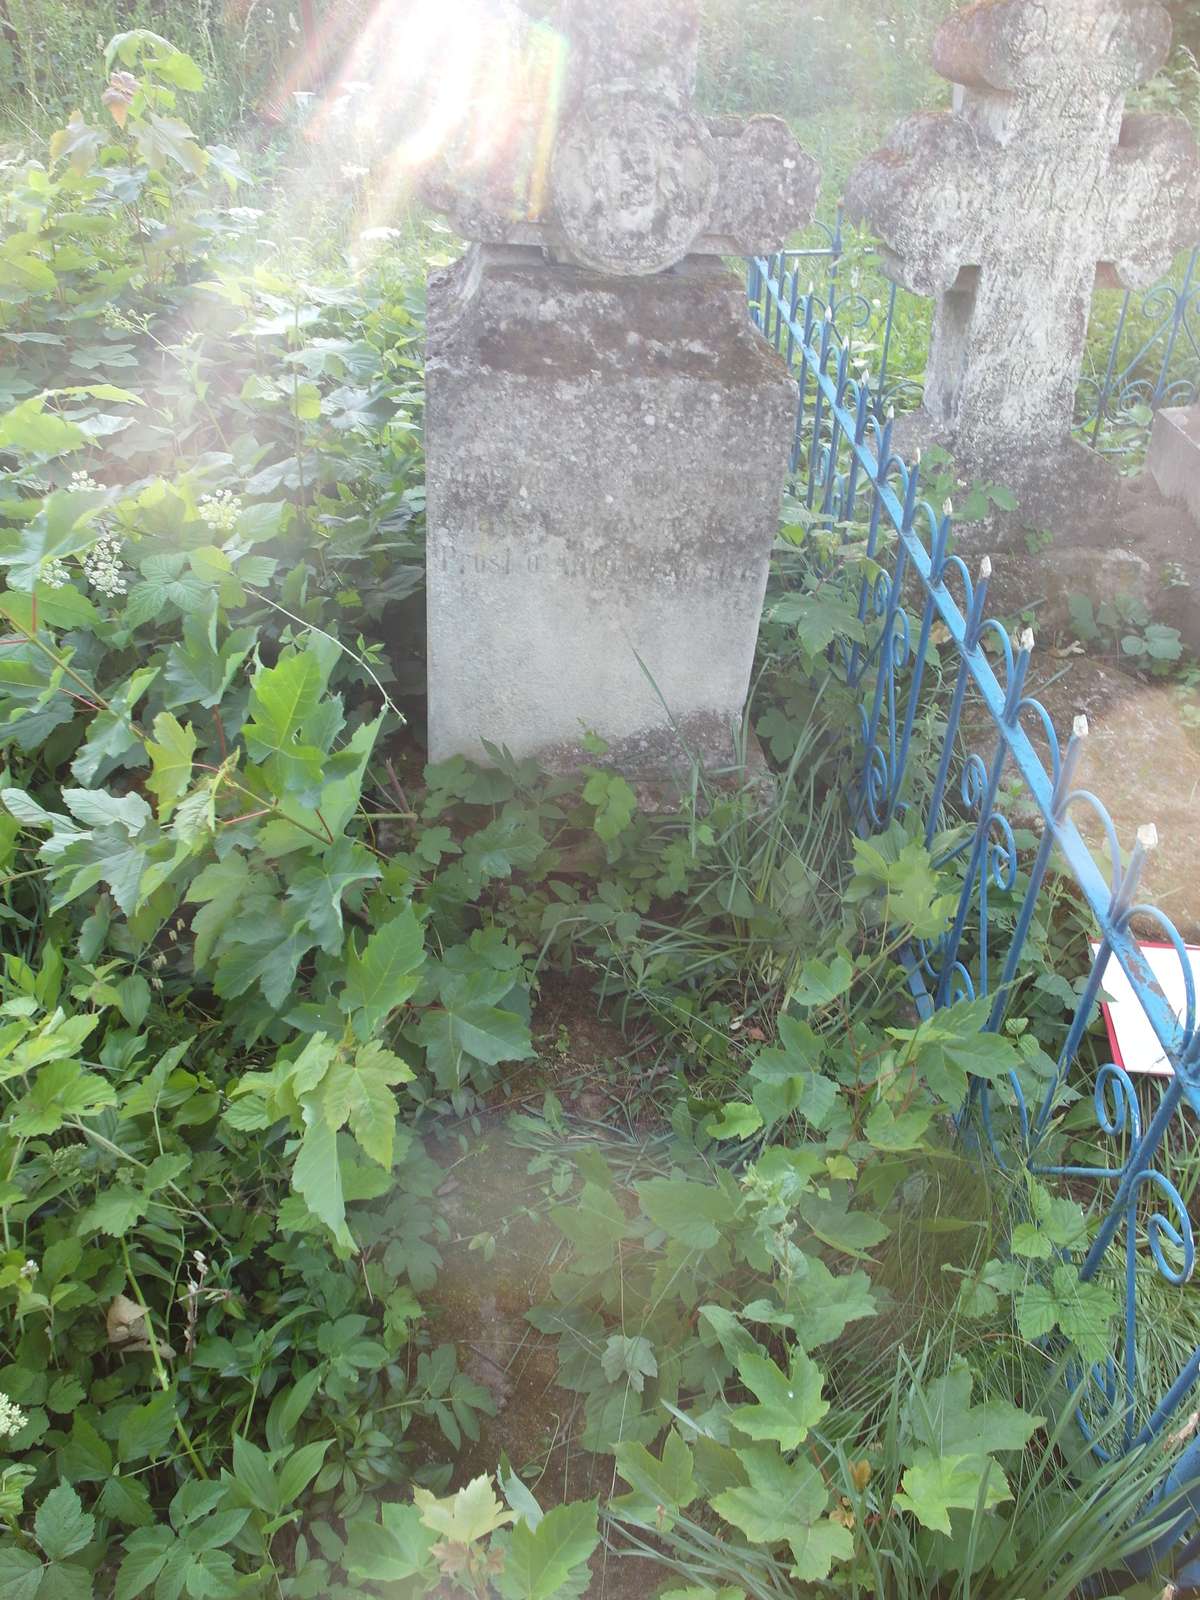 Tombstone of Maria Kowendat, Zbarazh cemetery, state of 2018